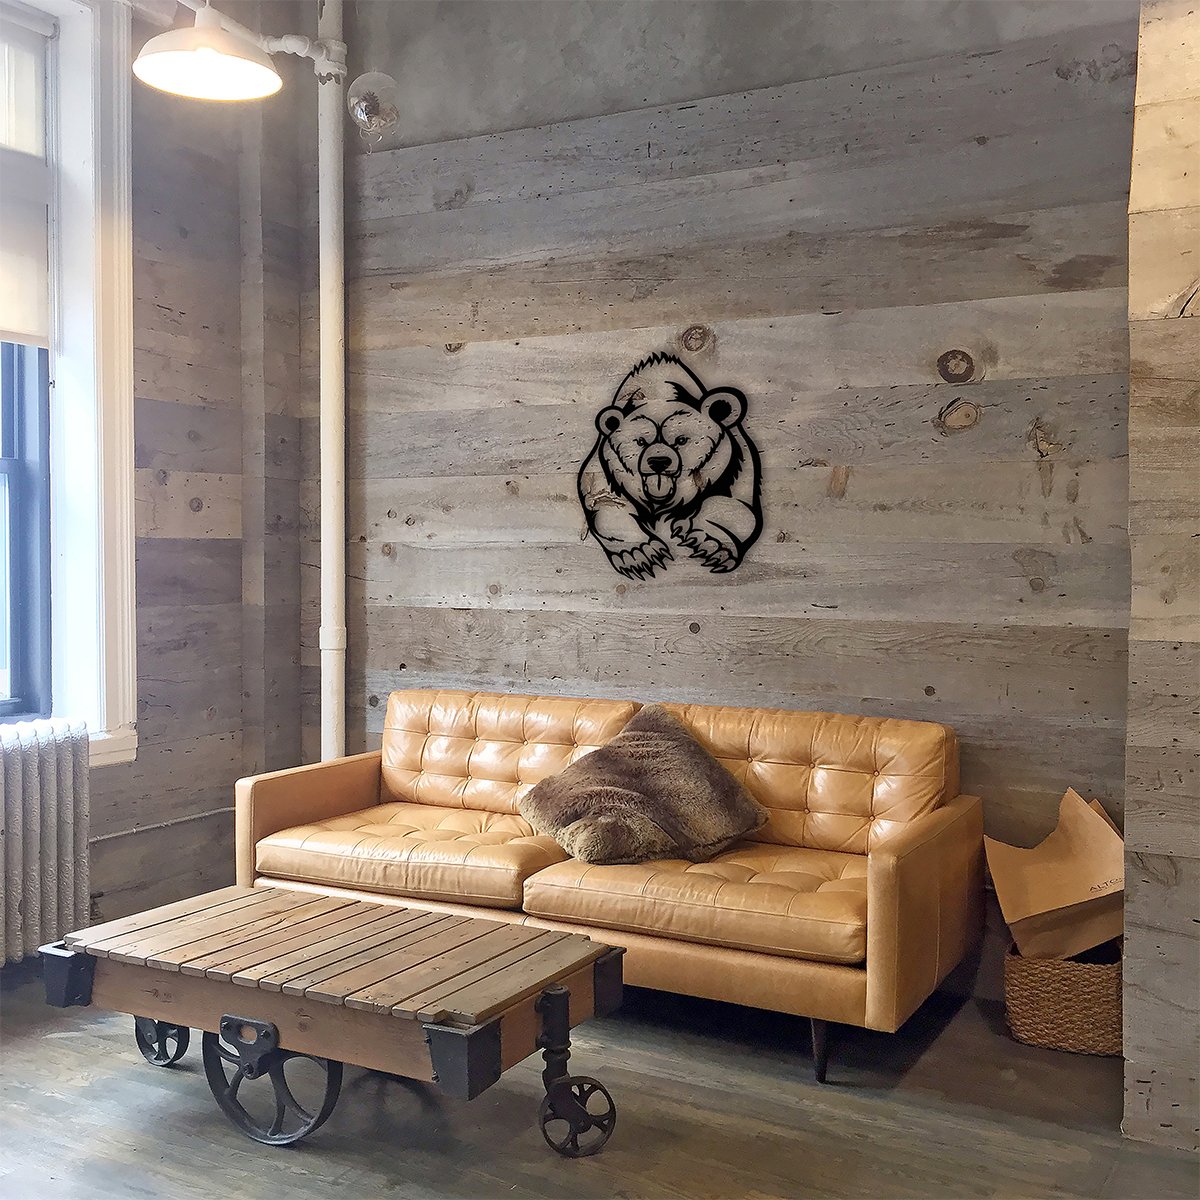 Metal Wall Art Angry Grizzly Bear in Pursuit